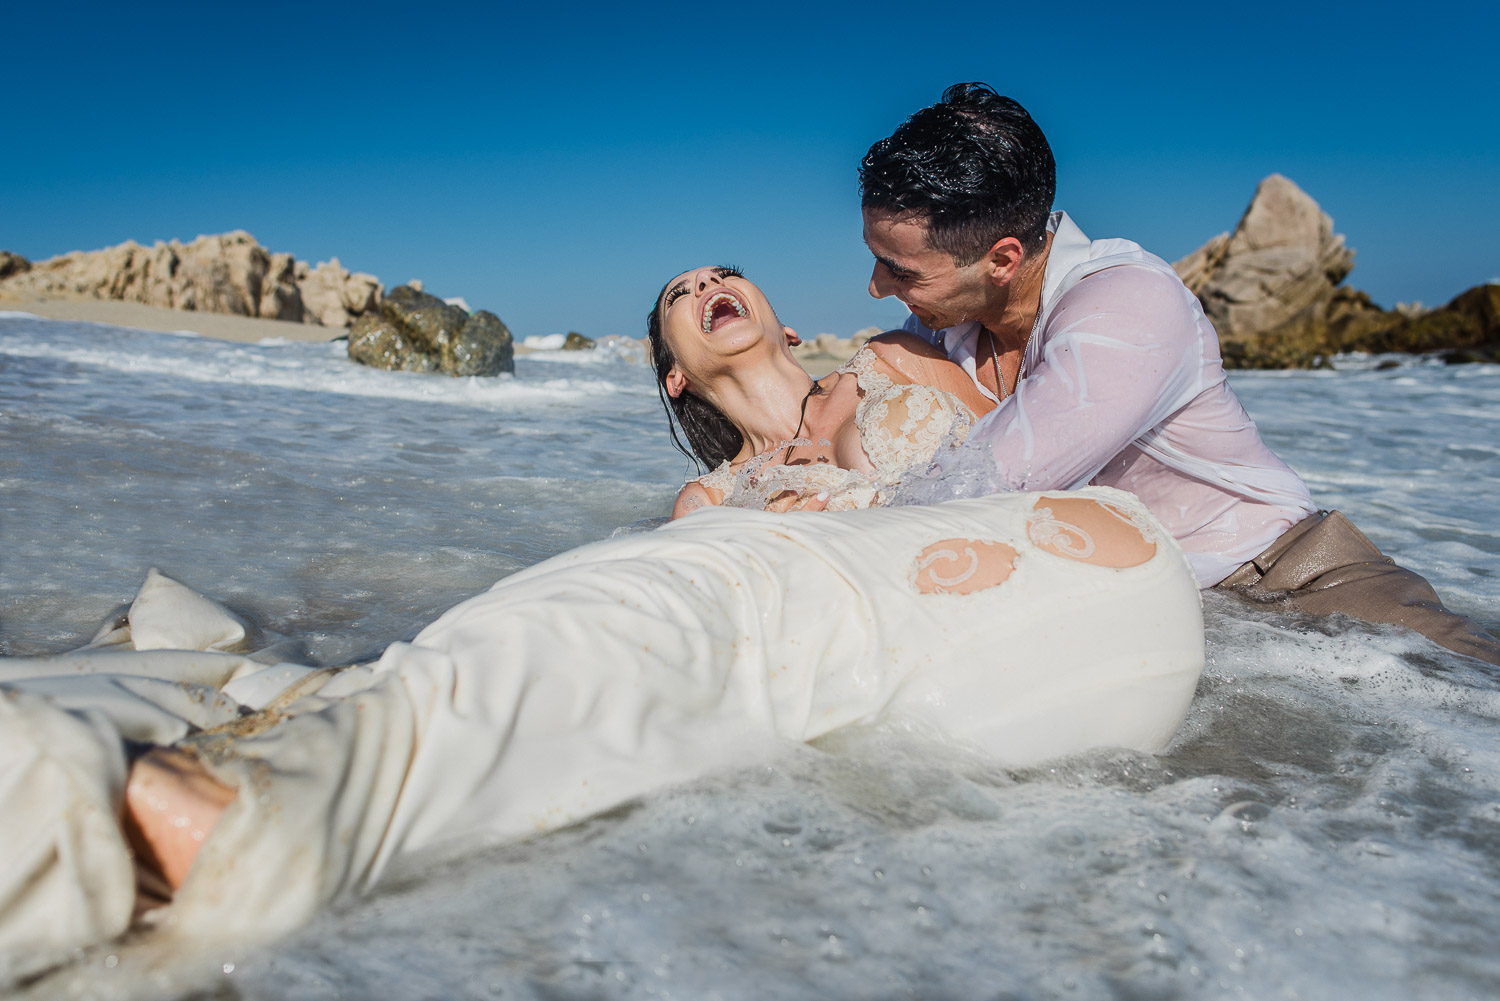  Bride and groom. Love, water and a lot of fun  Los cabos&nbsp; 